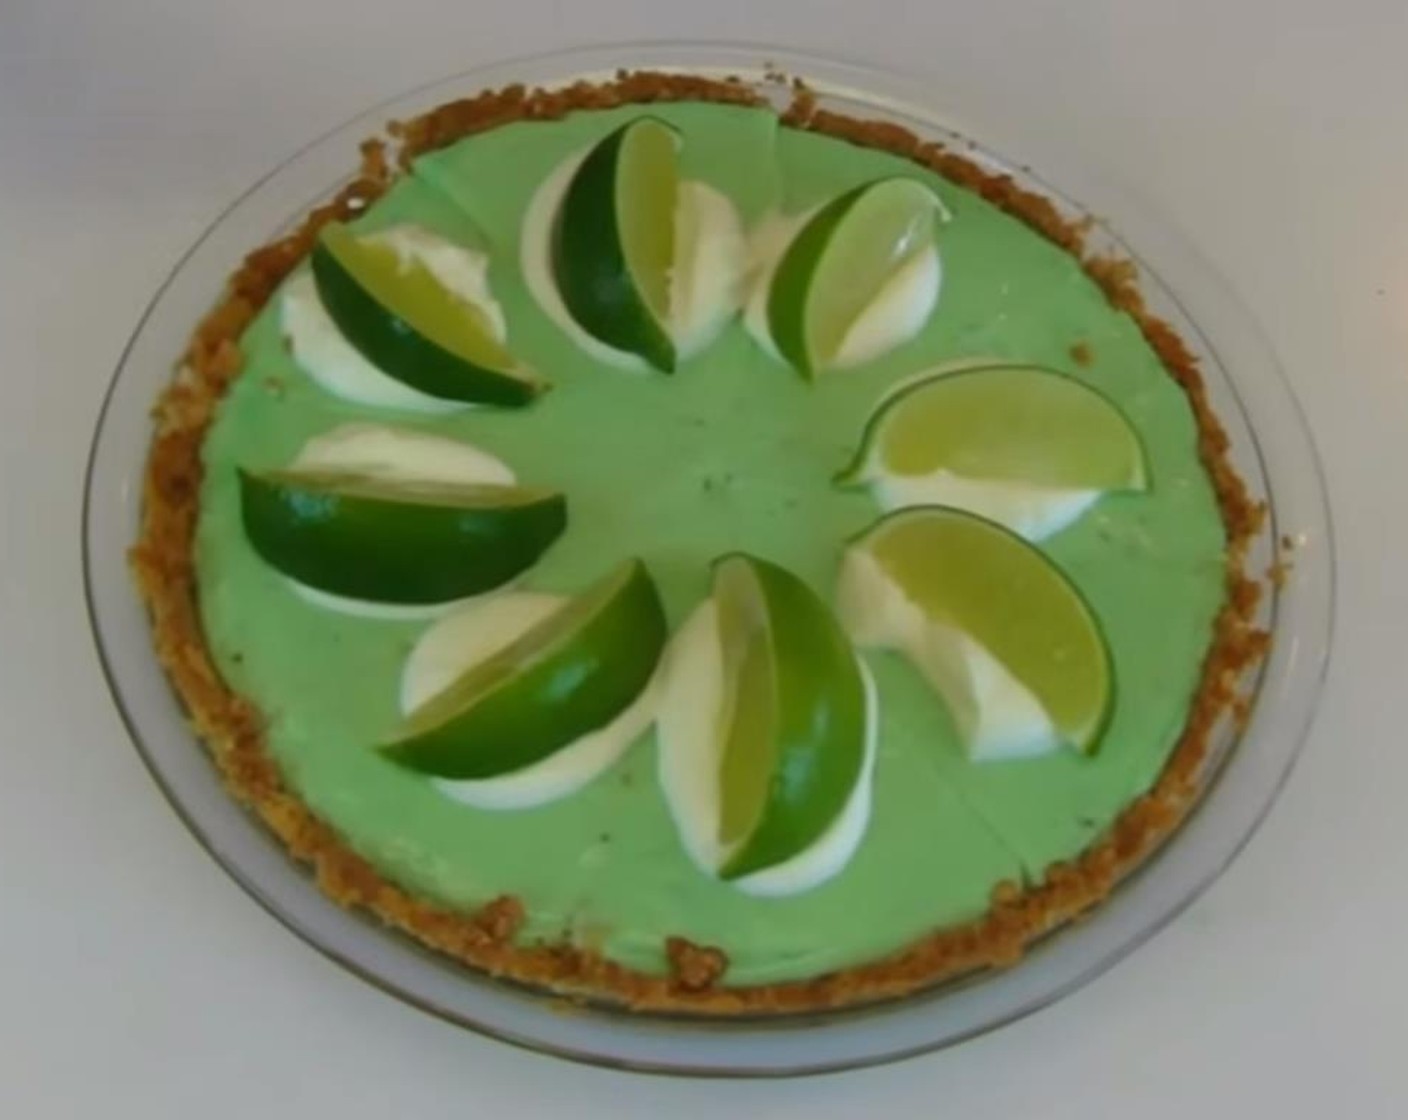 step 11 Remove from refrigerator and cut into 8 equally-sized wedges. Place a dollop of reserved sweetened whipped cream on the top of each pie wedge. Place the Limes (8 slices) on top of each of the dollops of whipped cream.